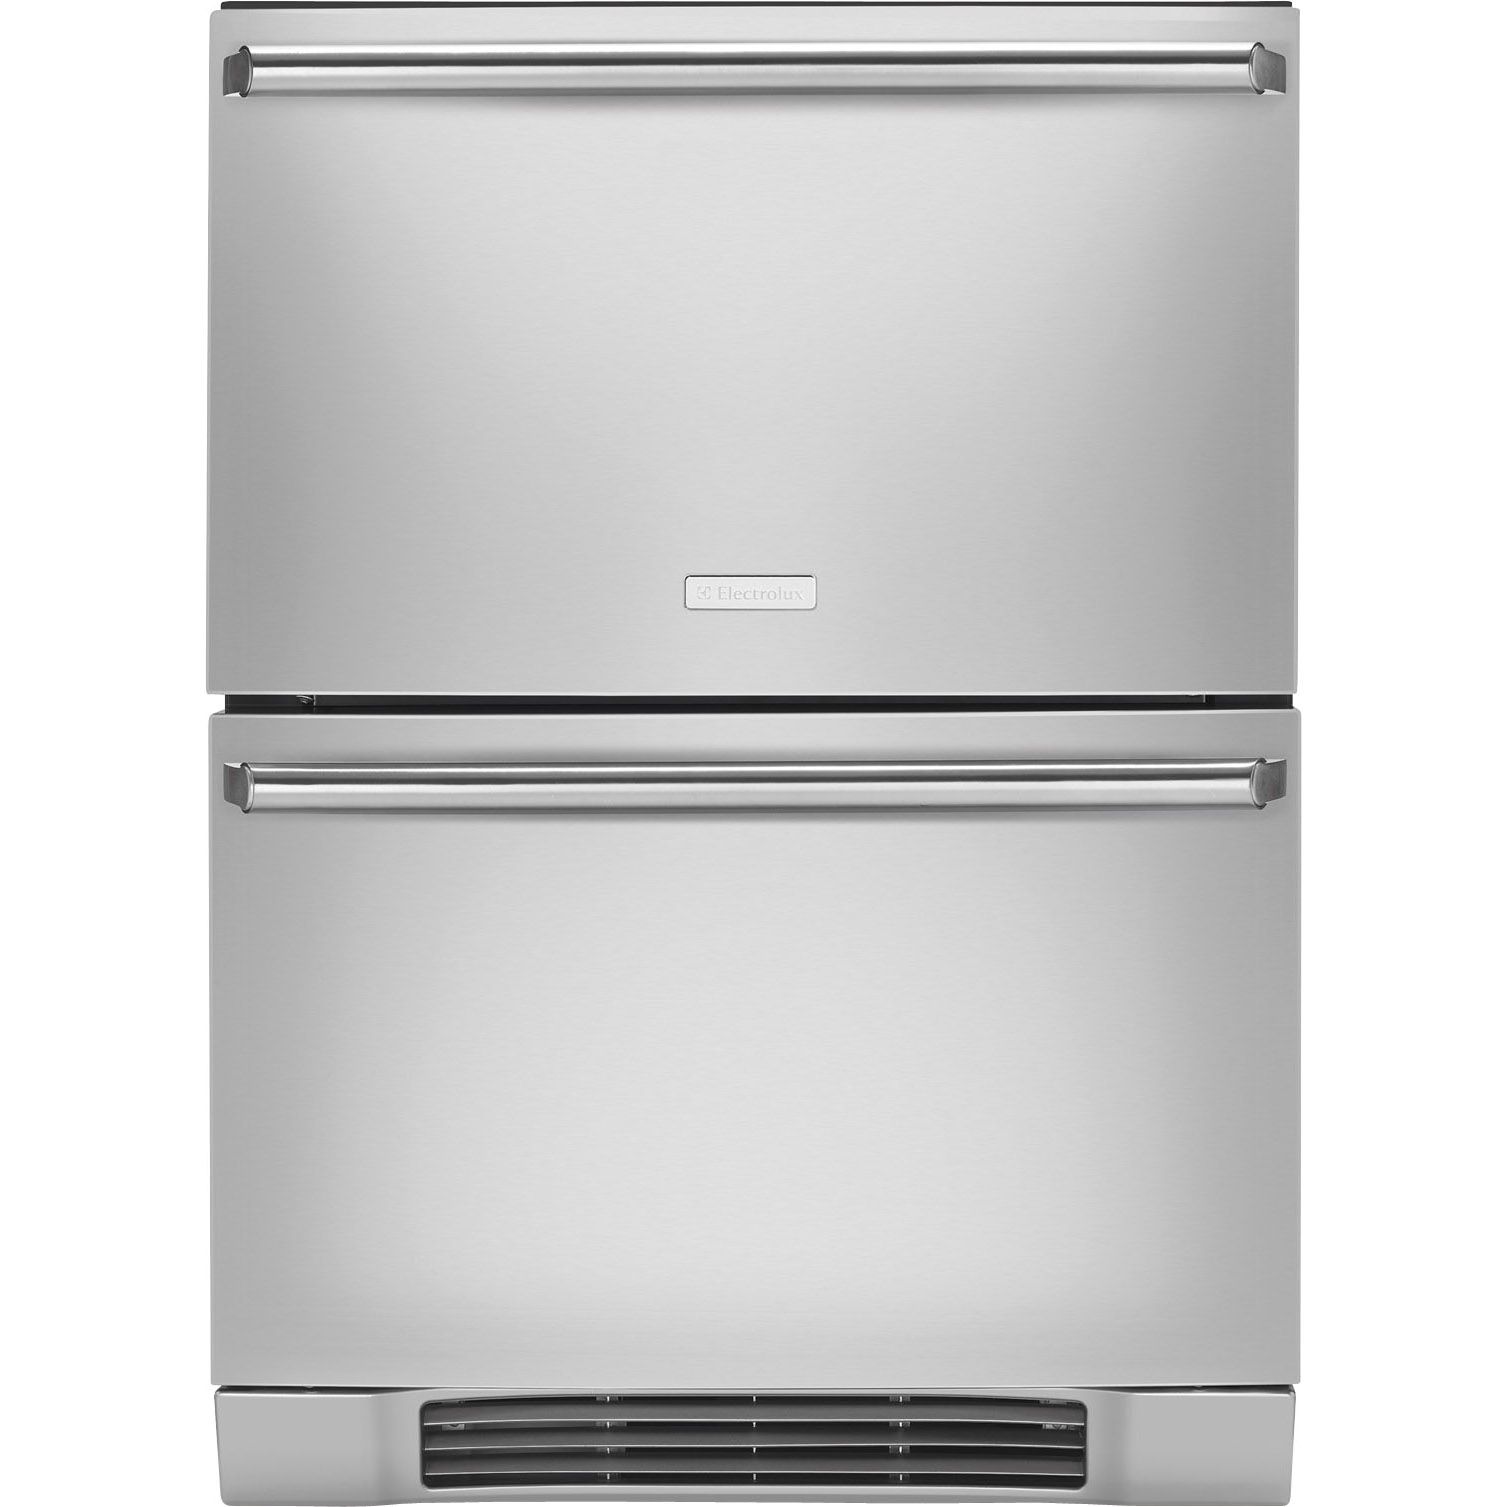 Electrolux 6.0 cu. ft. Double Drawer Refrigerator - Stainless Steel